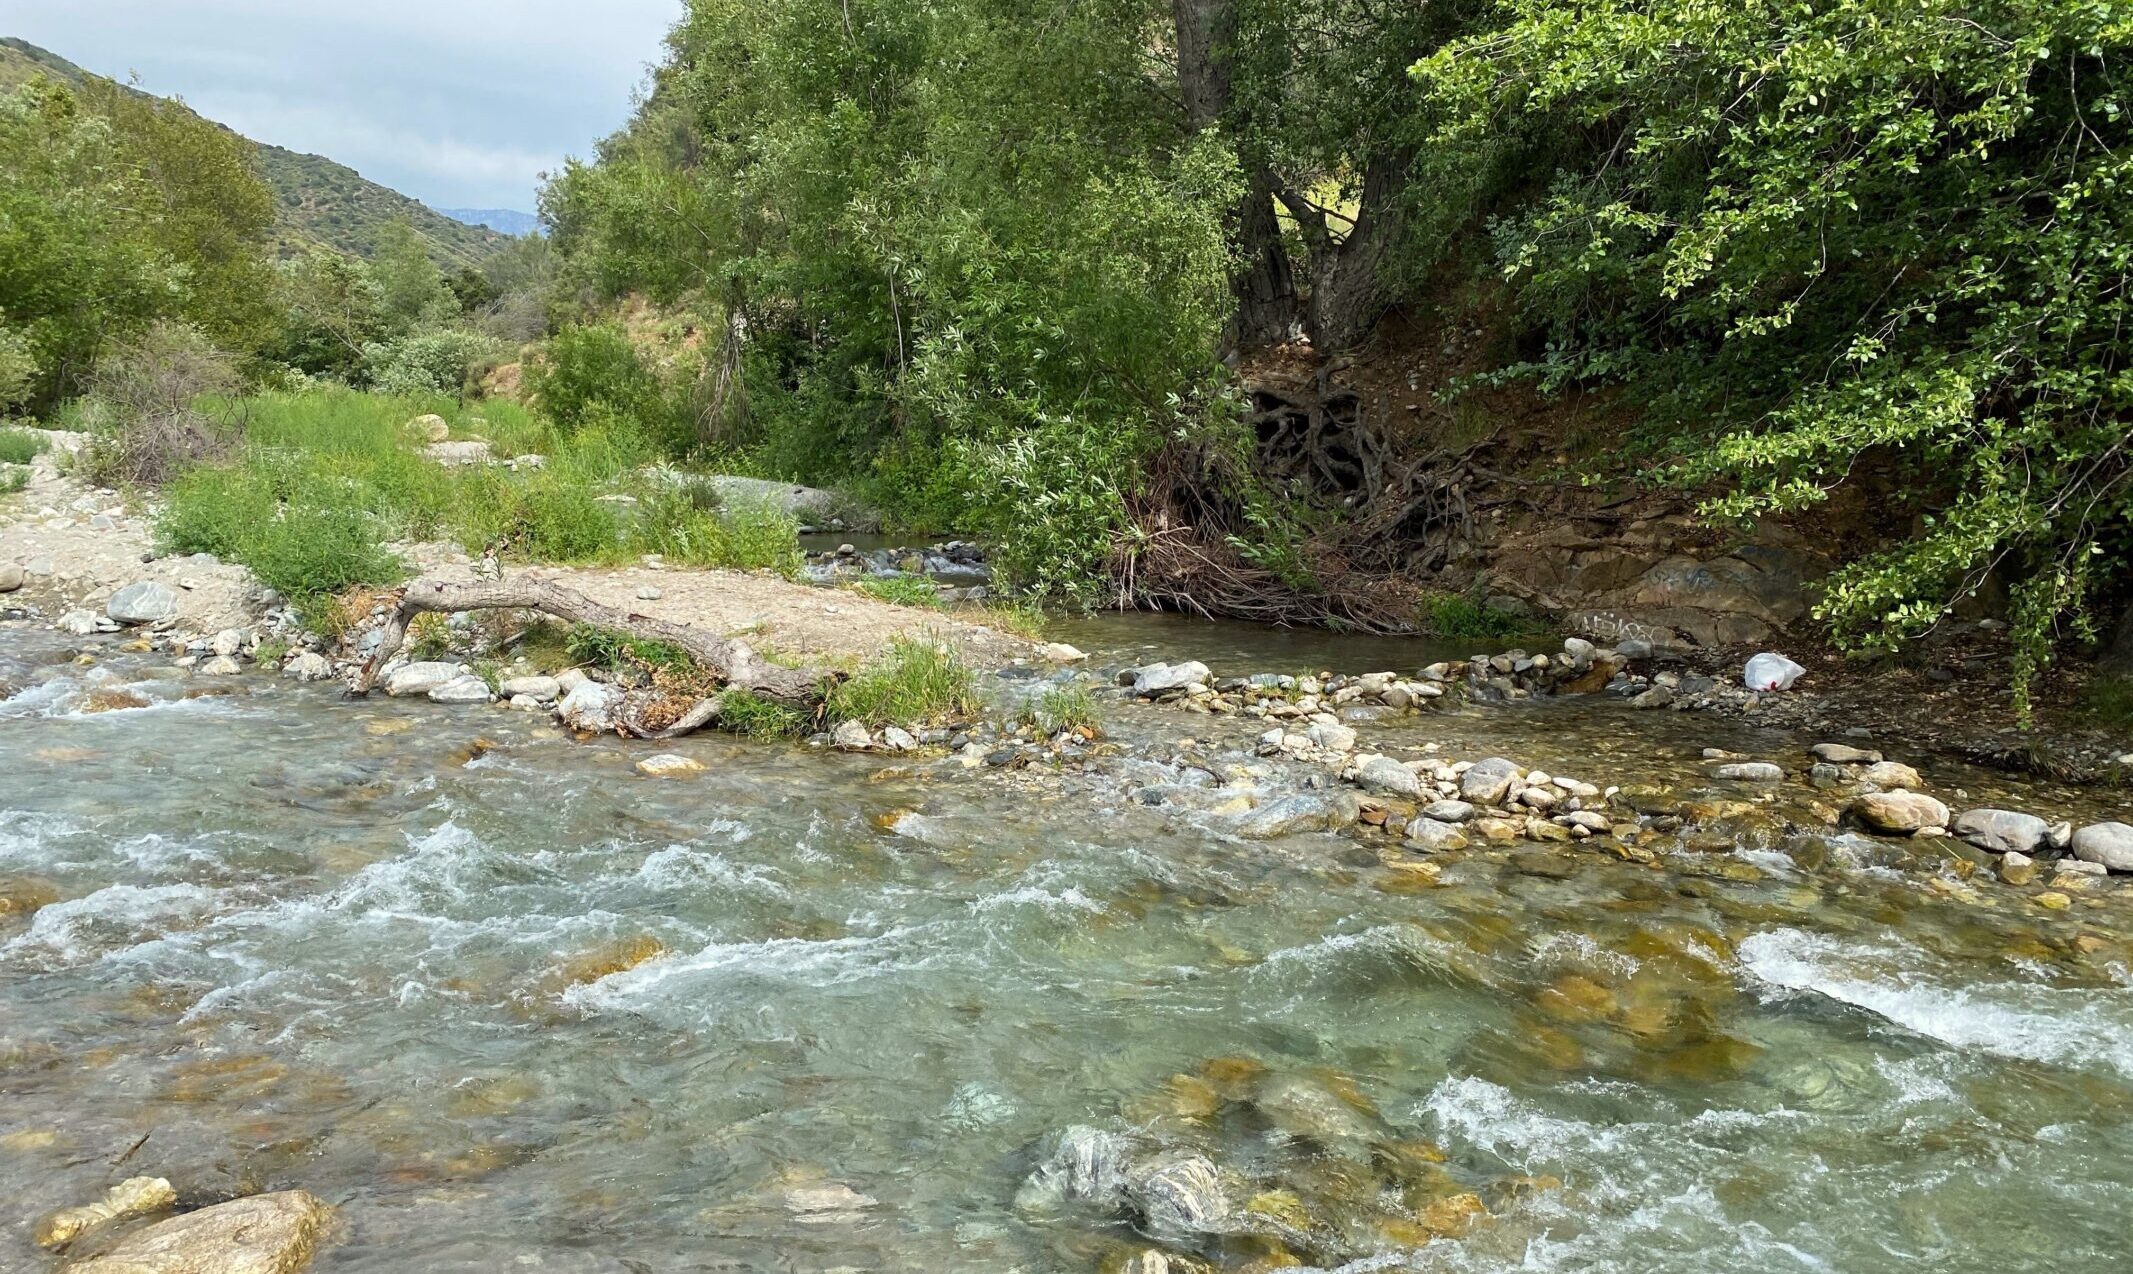 The North Fork of the San Gabriel River